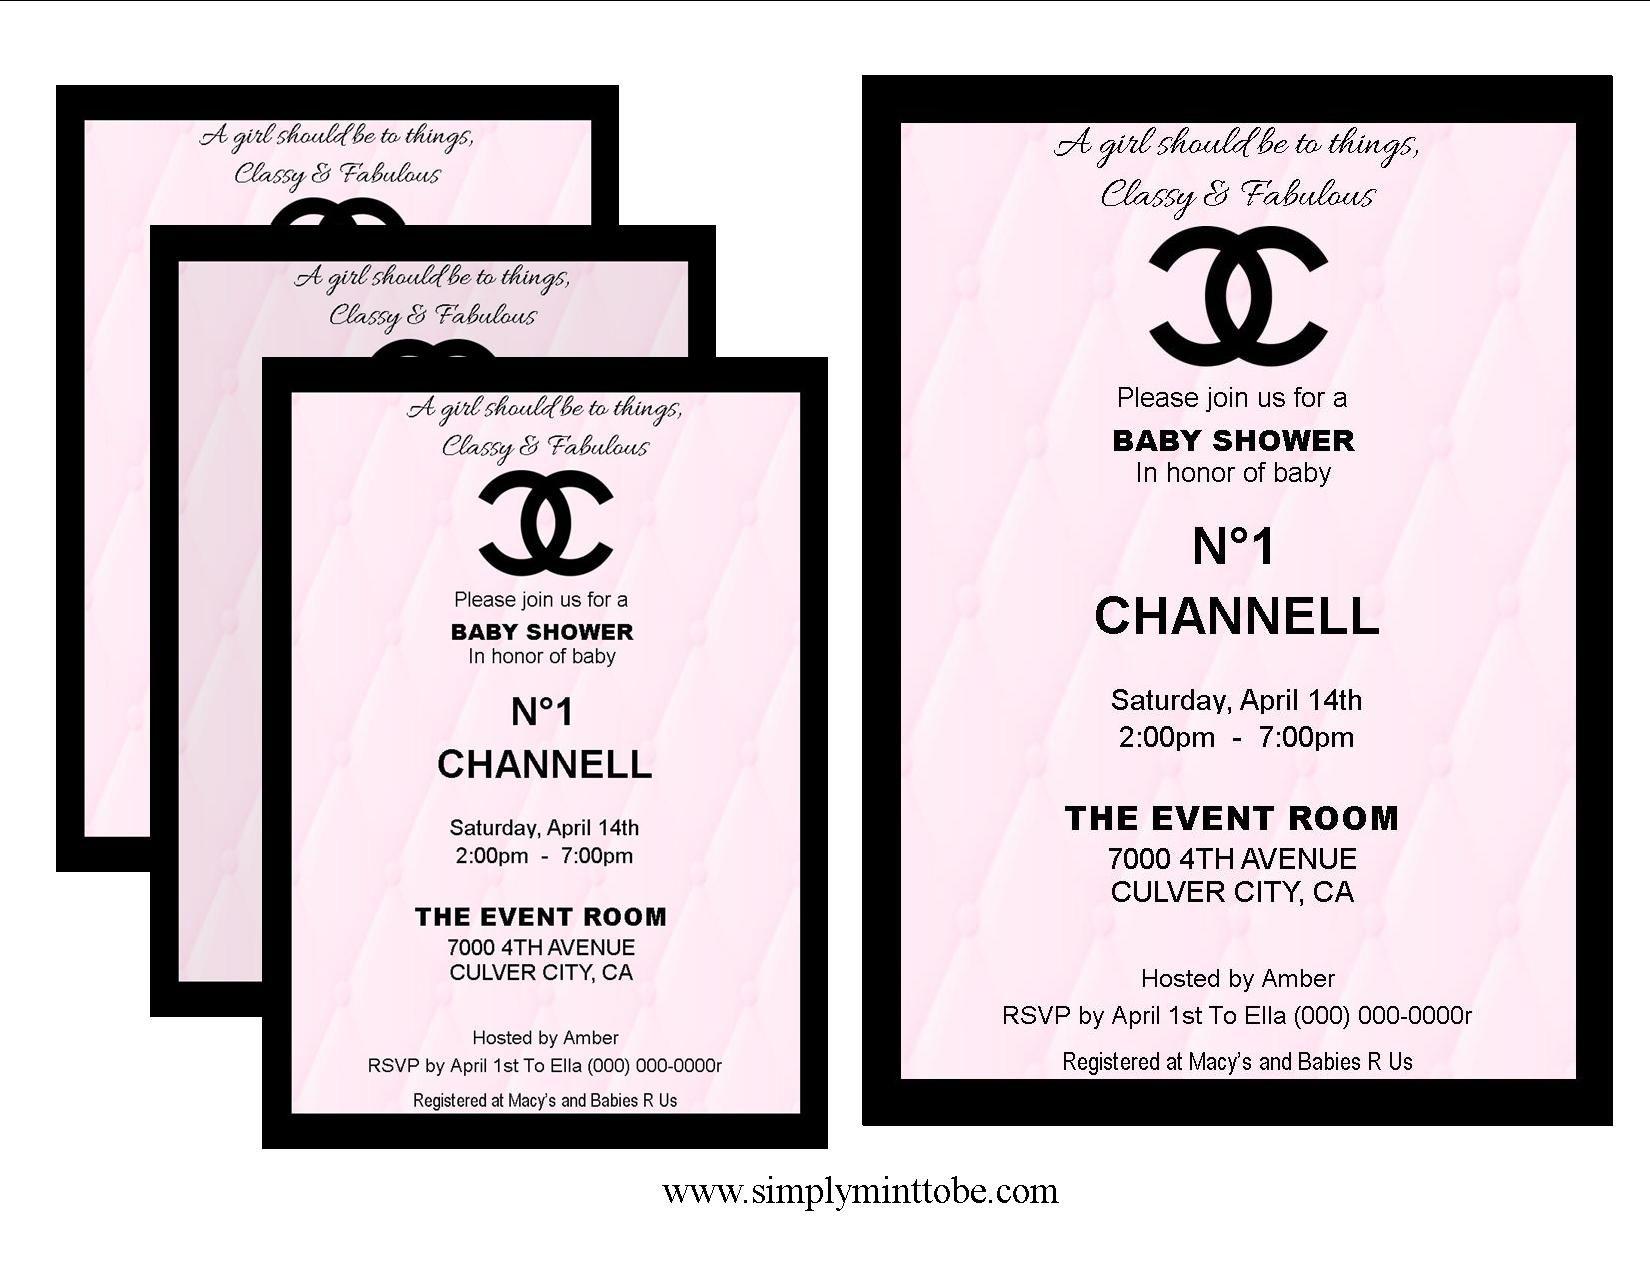 Classy Pink Chanel Logo - Coco Chanel Inspired Invitations Baby Shower Pink and Black Leather